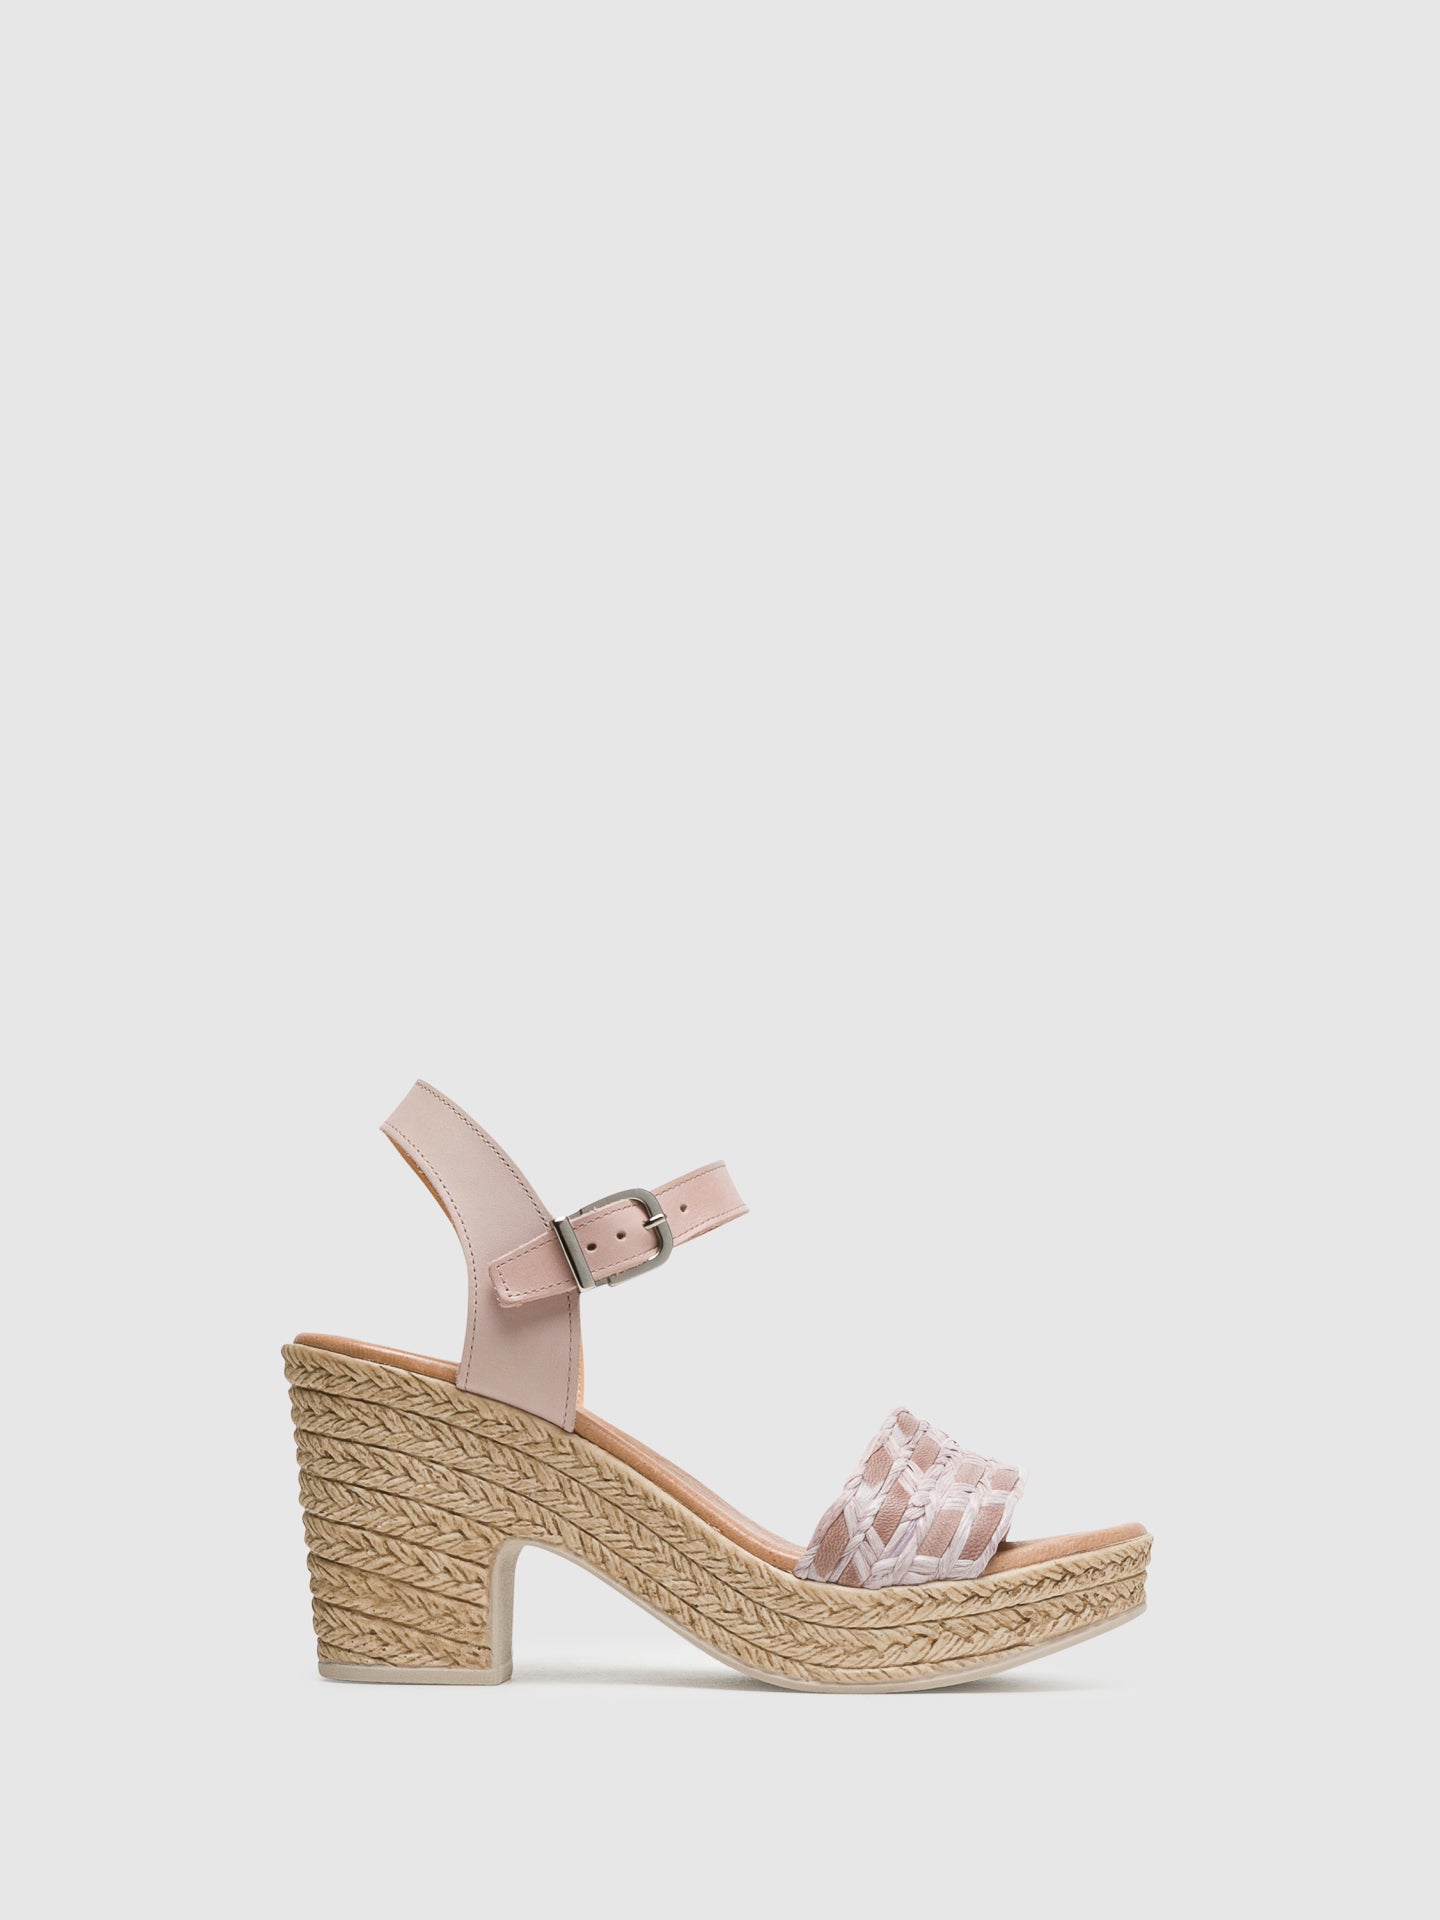 Clay's Beige Ankle Strap Sandals